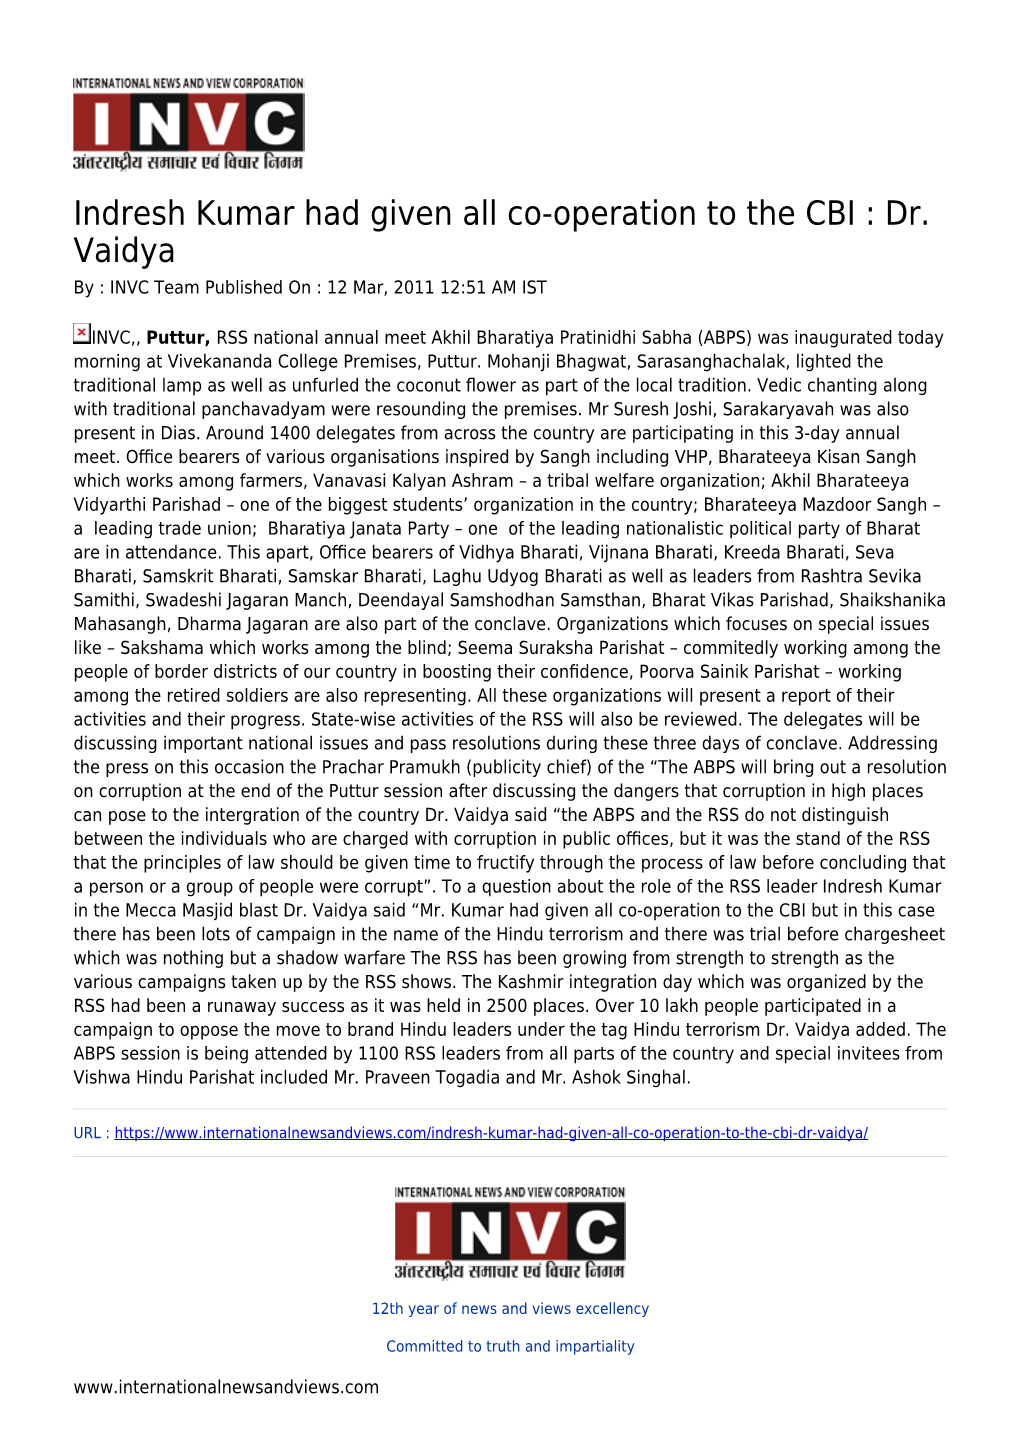 Indresh Kumar Had Given All Co-Operation to the CBI : Dr. Vaidya by : INVC Team Published on : 12 Mar, 2011 12:51 AM IST